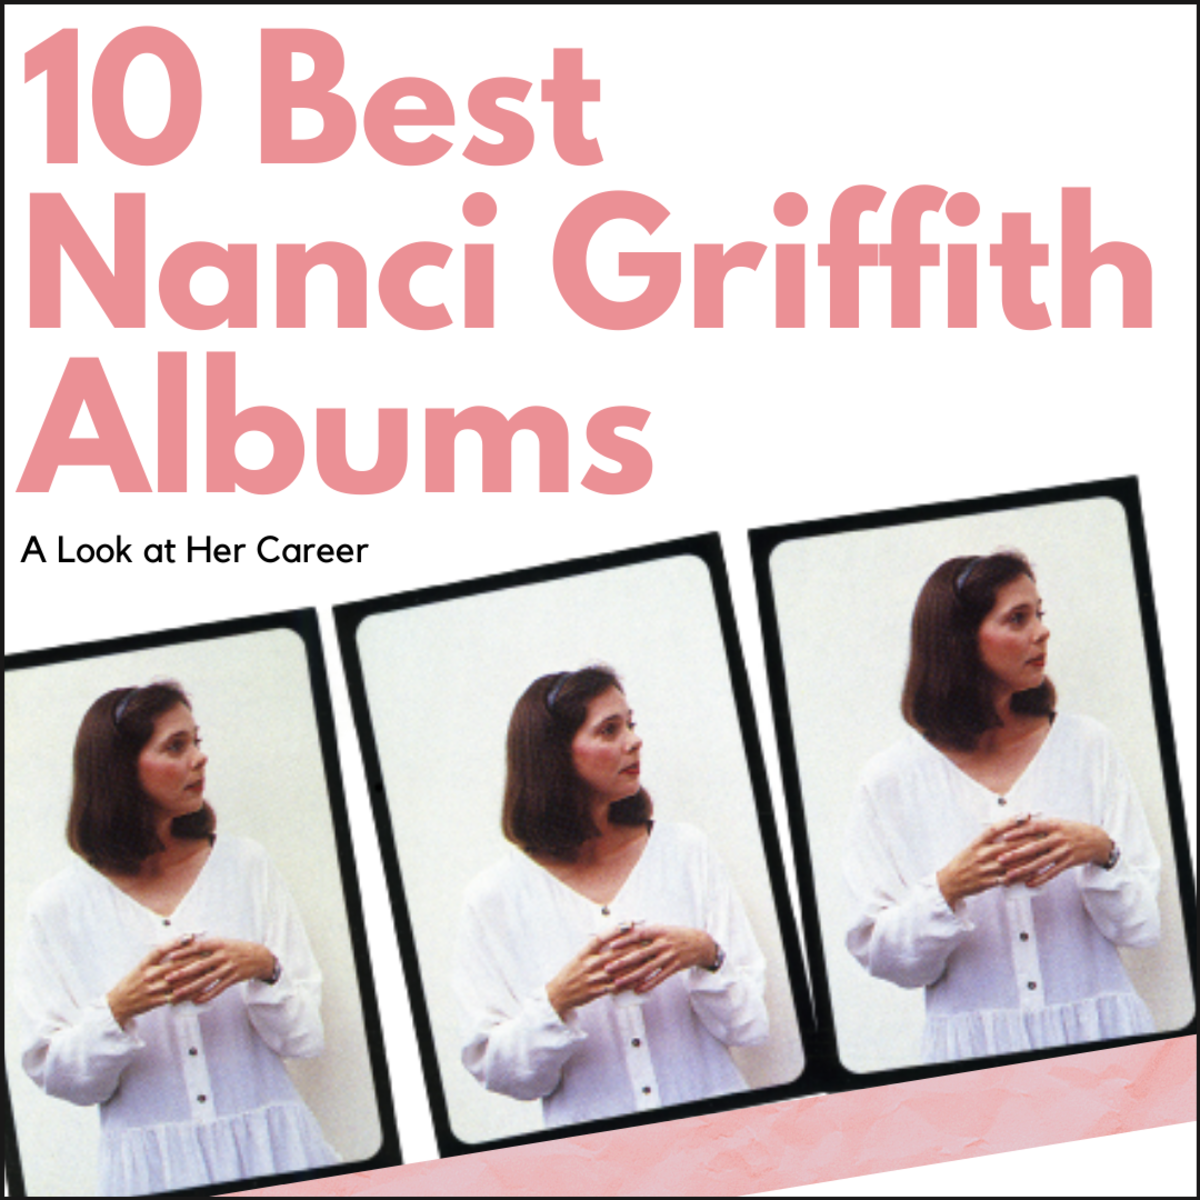 Nanci Griffith: The Folk-Country Queen (Albums, Songs & More)